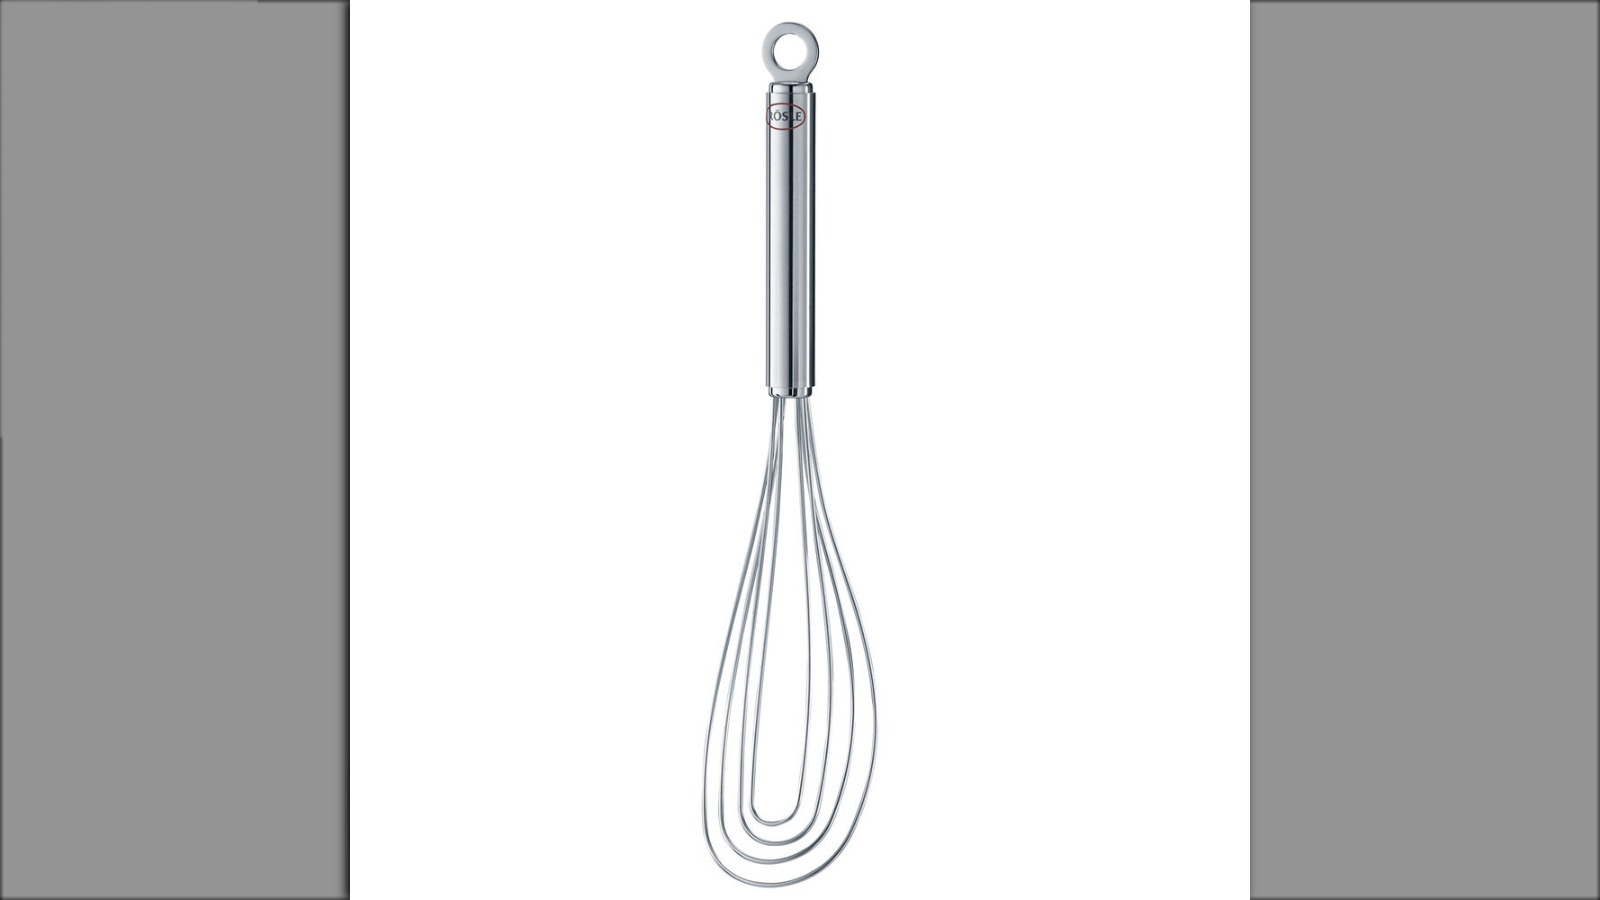 https://www.mashed.com/img/gallery/what-is-a-flat-whisk-and-why-should-you-use-it/l-intro-1621260674.jpg